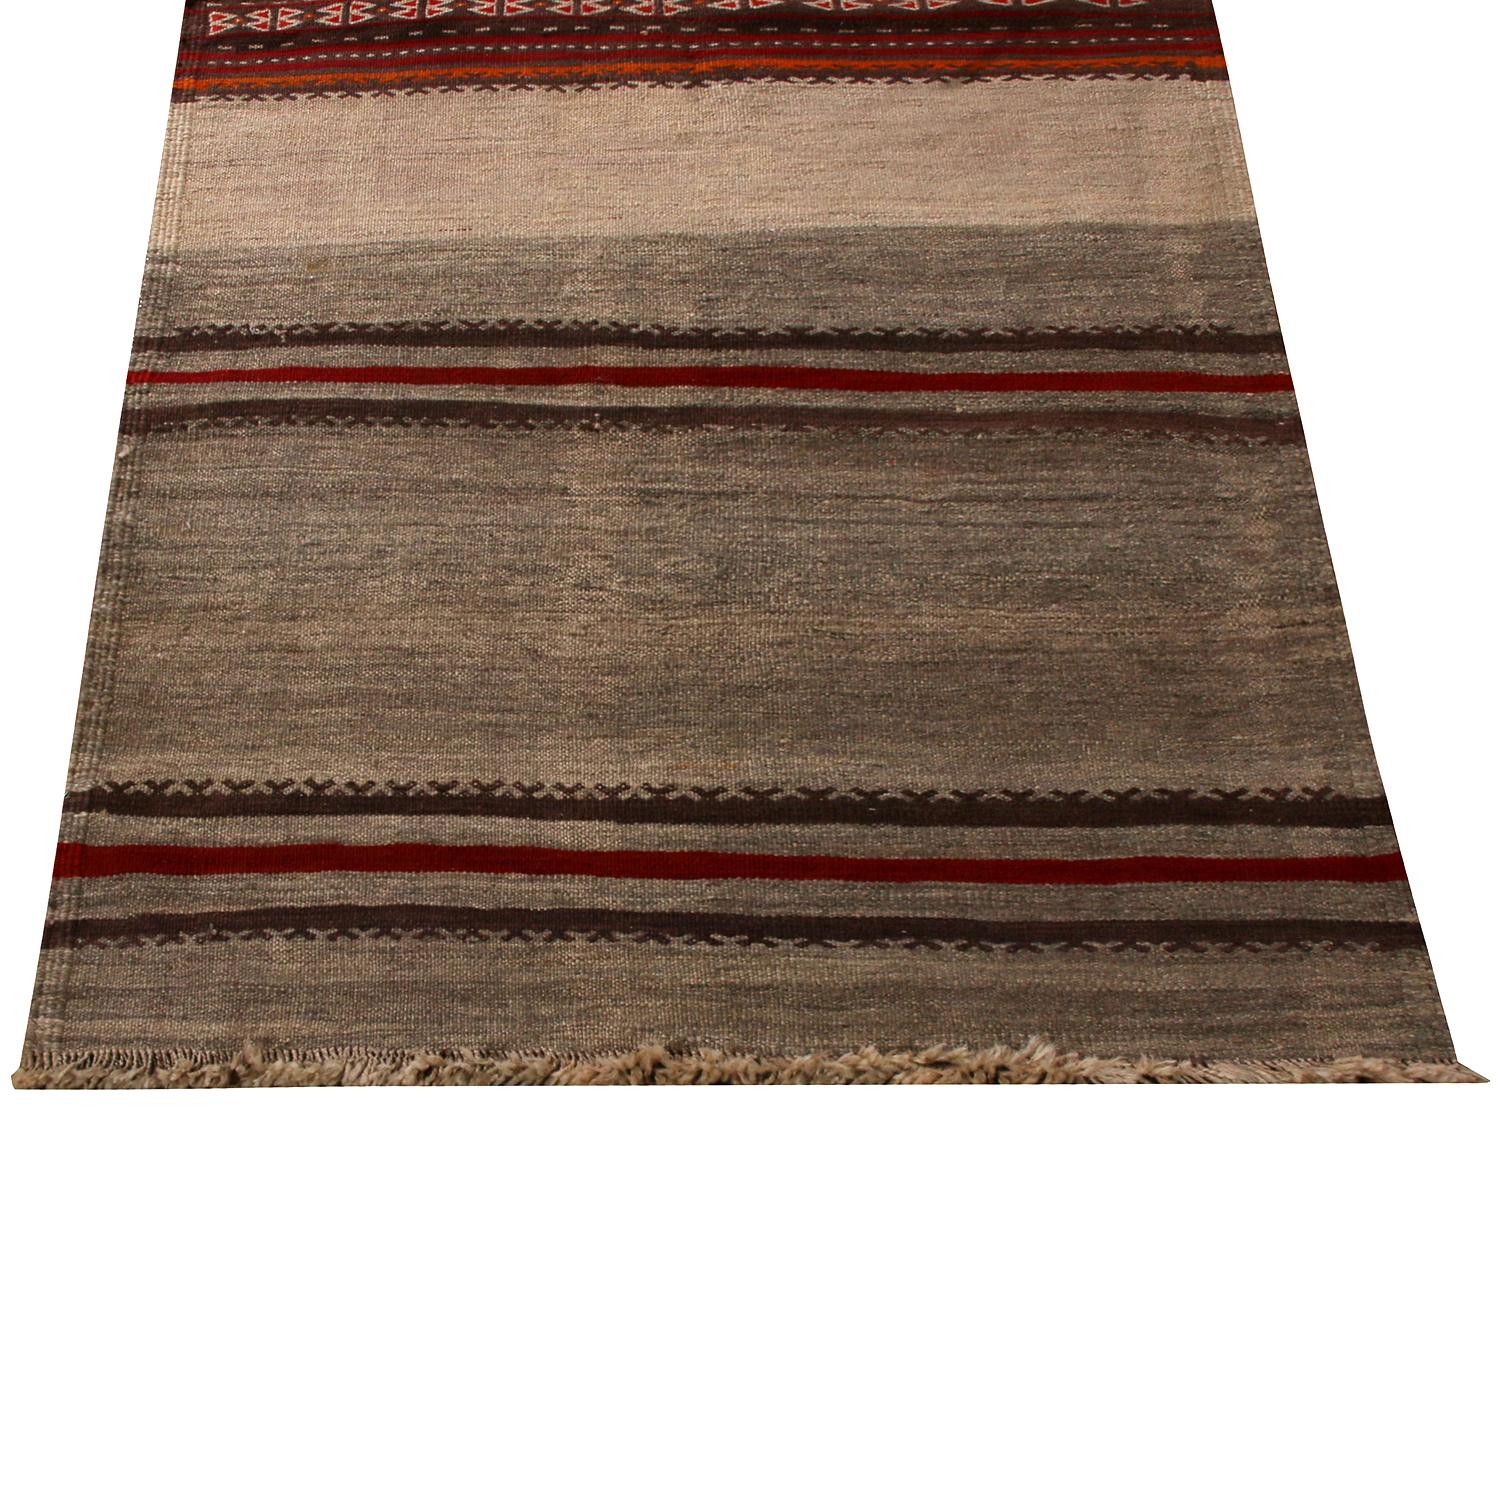 Hand-Woven Vintage Beige Brown and Red Wool Kalat Persian Kilim Runner by Rug & Kilim For Sale